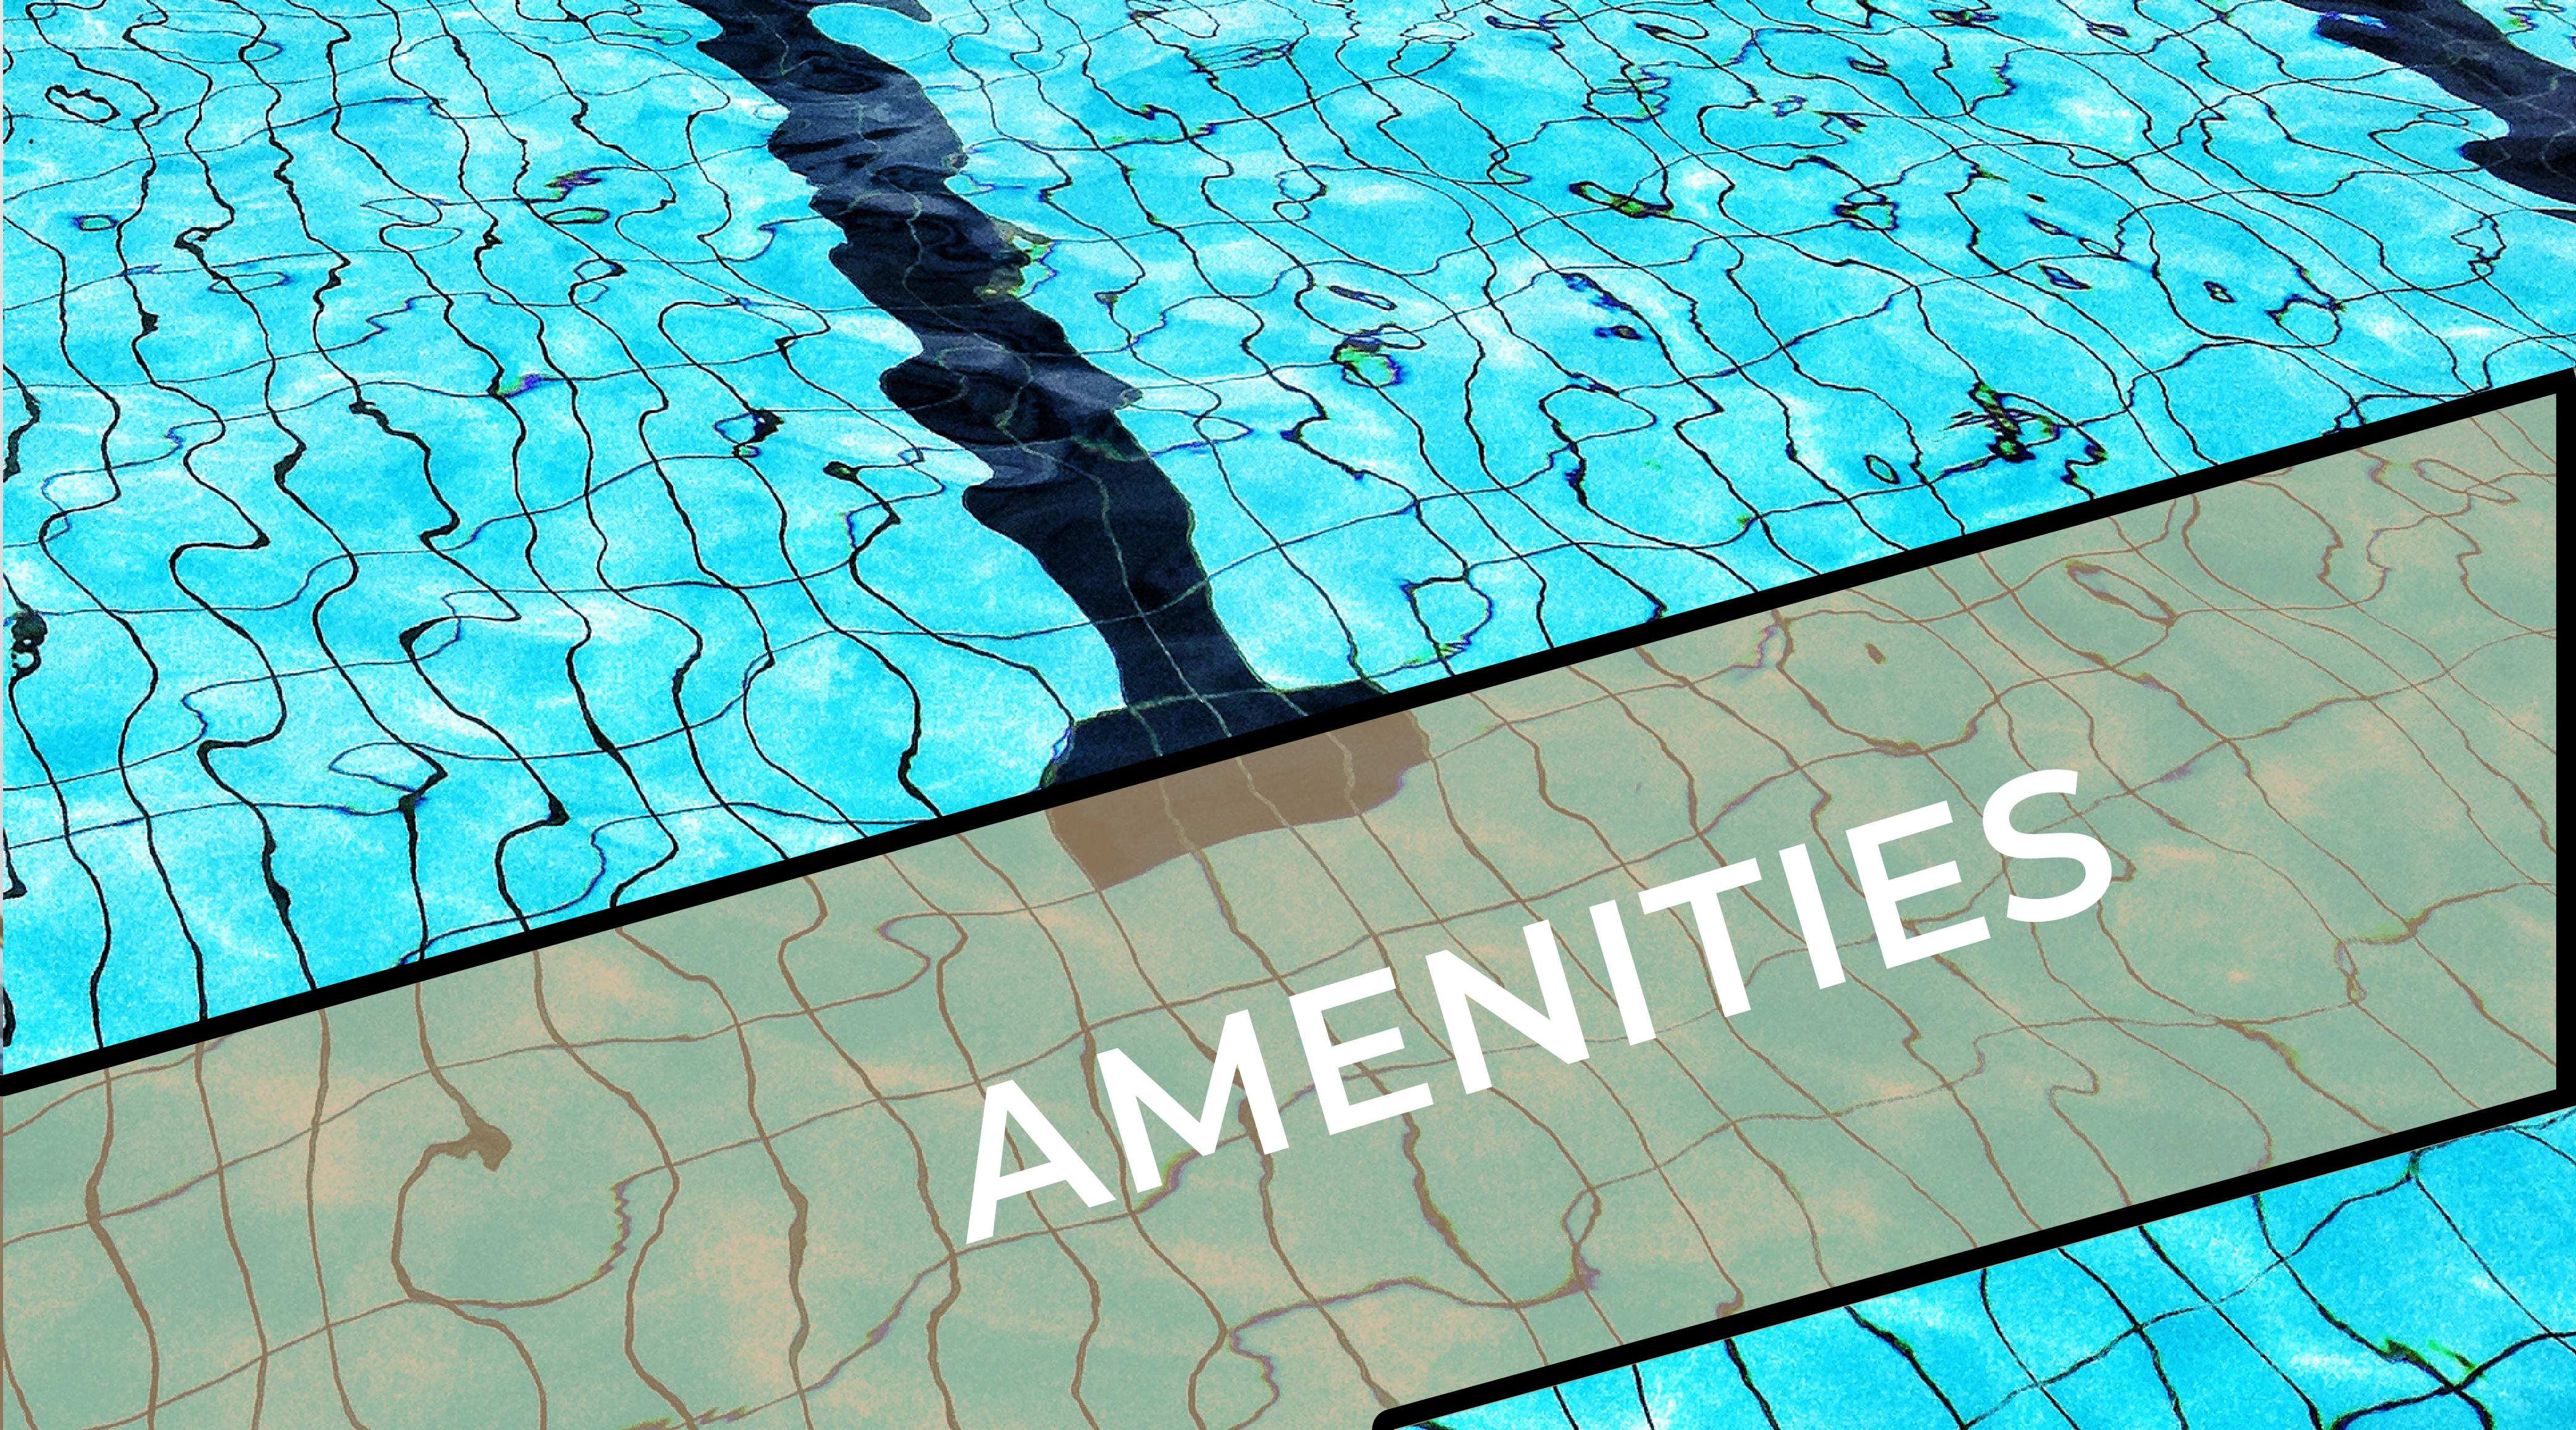 Amenities at Xenia Apartments in Golden Valley, Minnesota